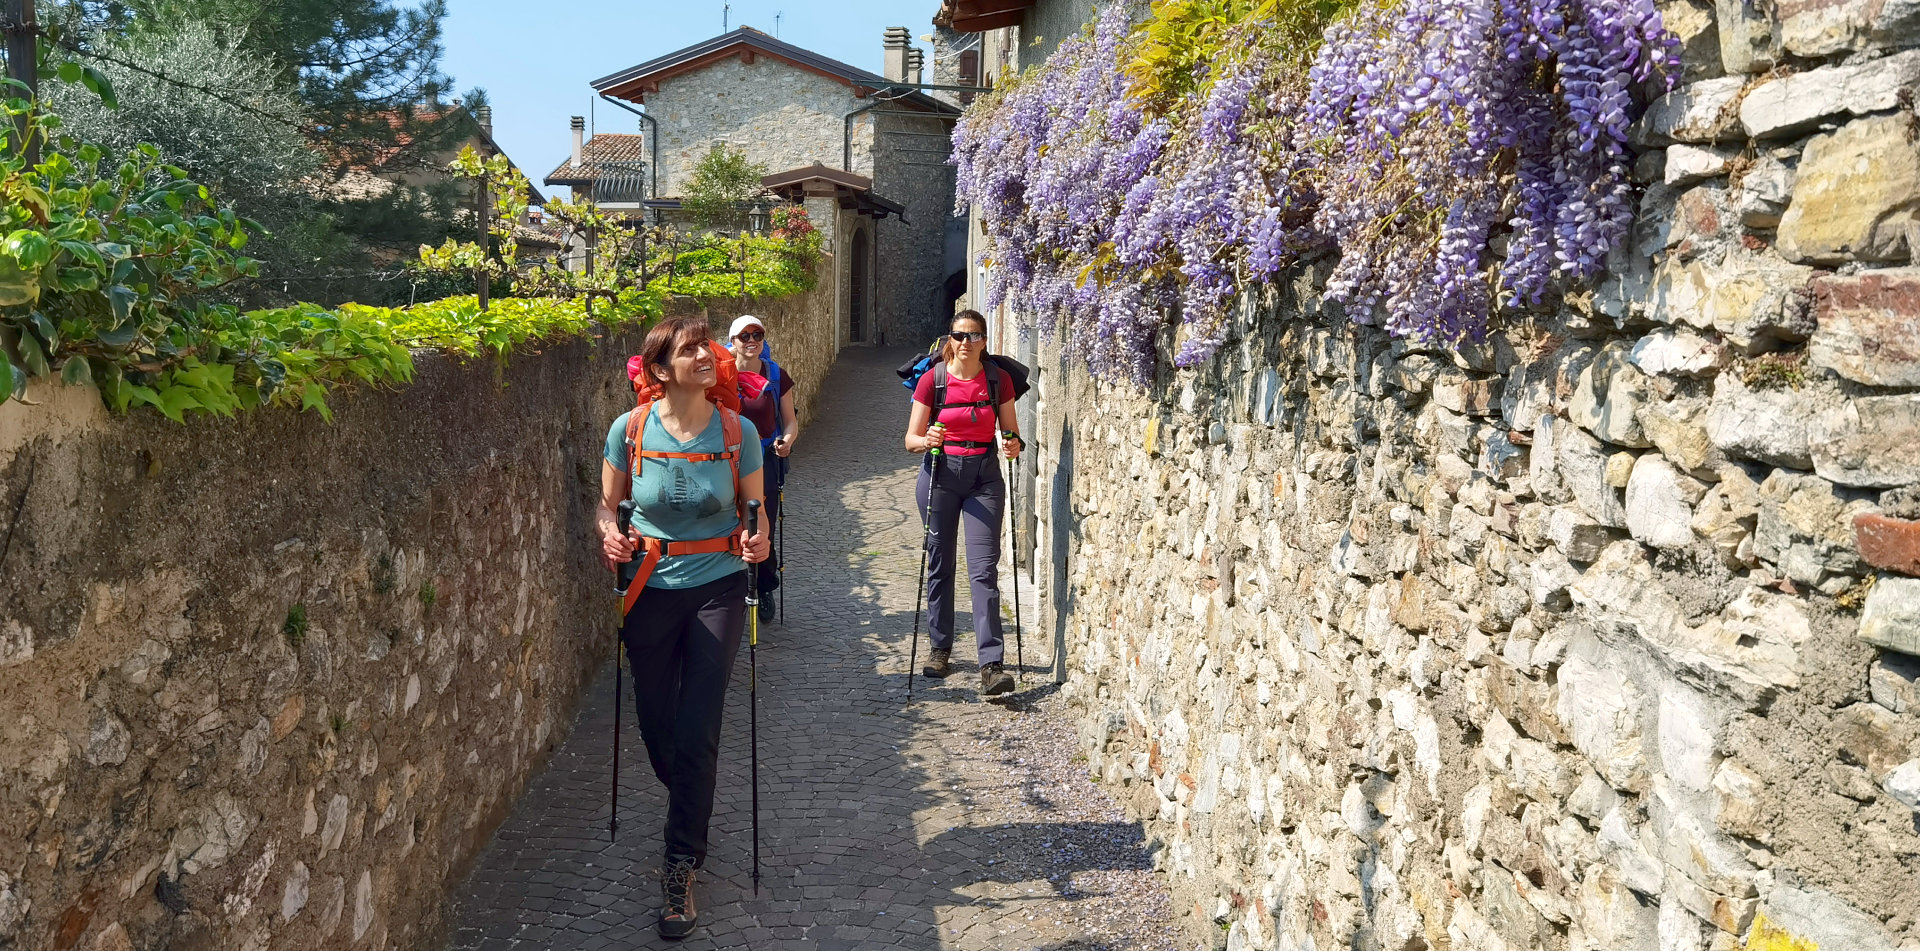 Among flowery alleys and mountain trails